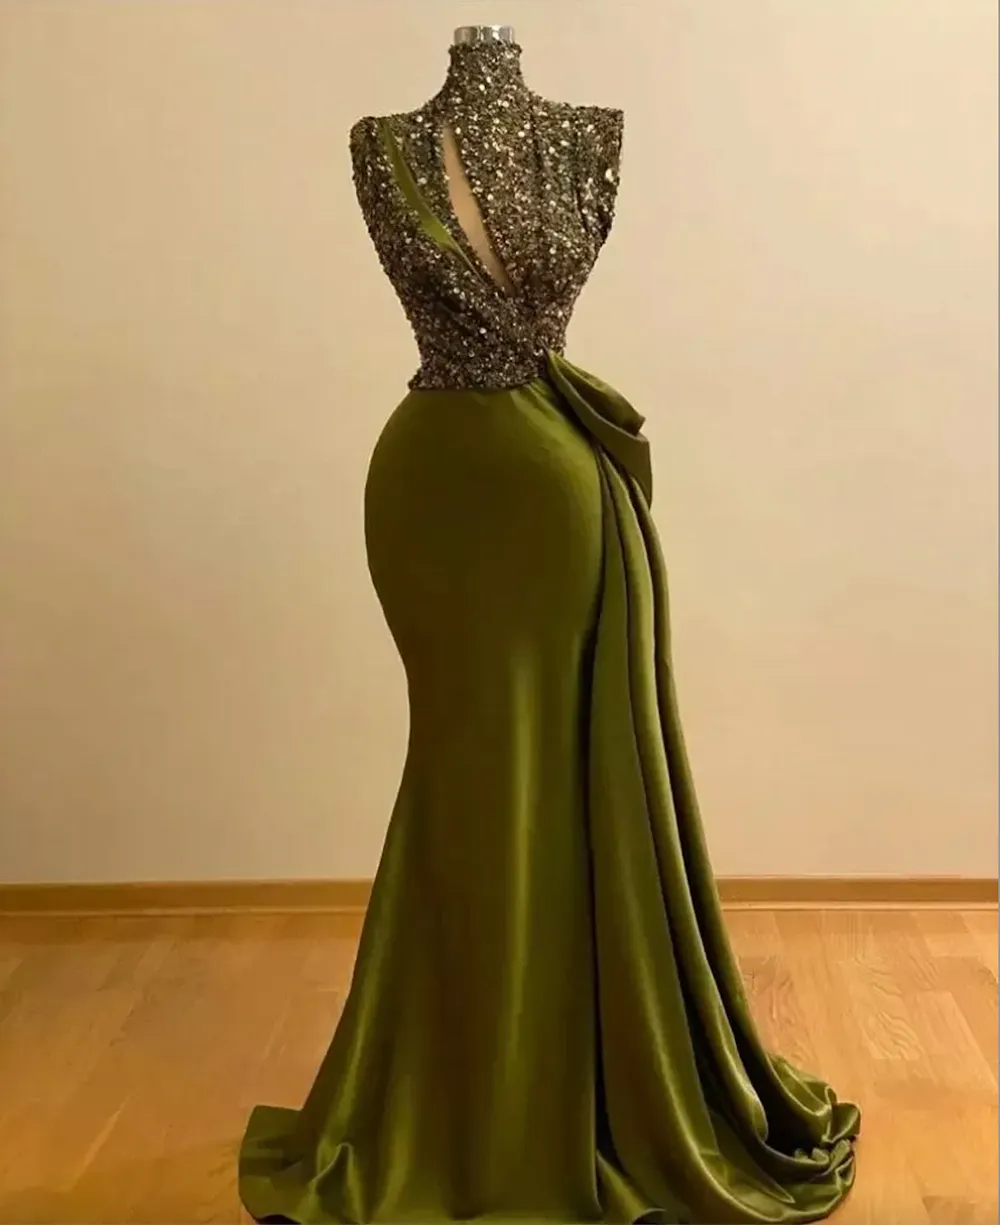 Olive Green Satin Mermaid Evening Dresses High Neck Lace Applique Ruched Court Train Formal Evening Party Wear Prom Dresses